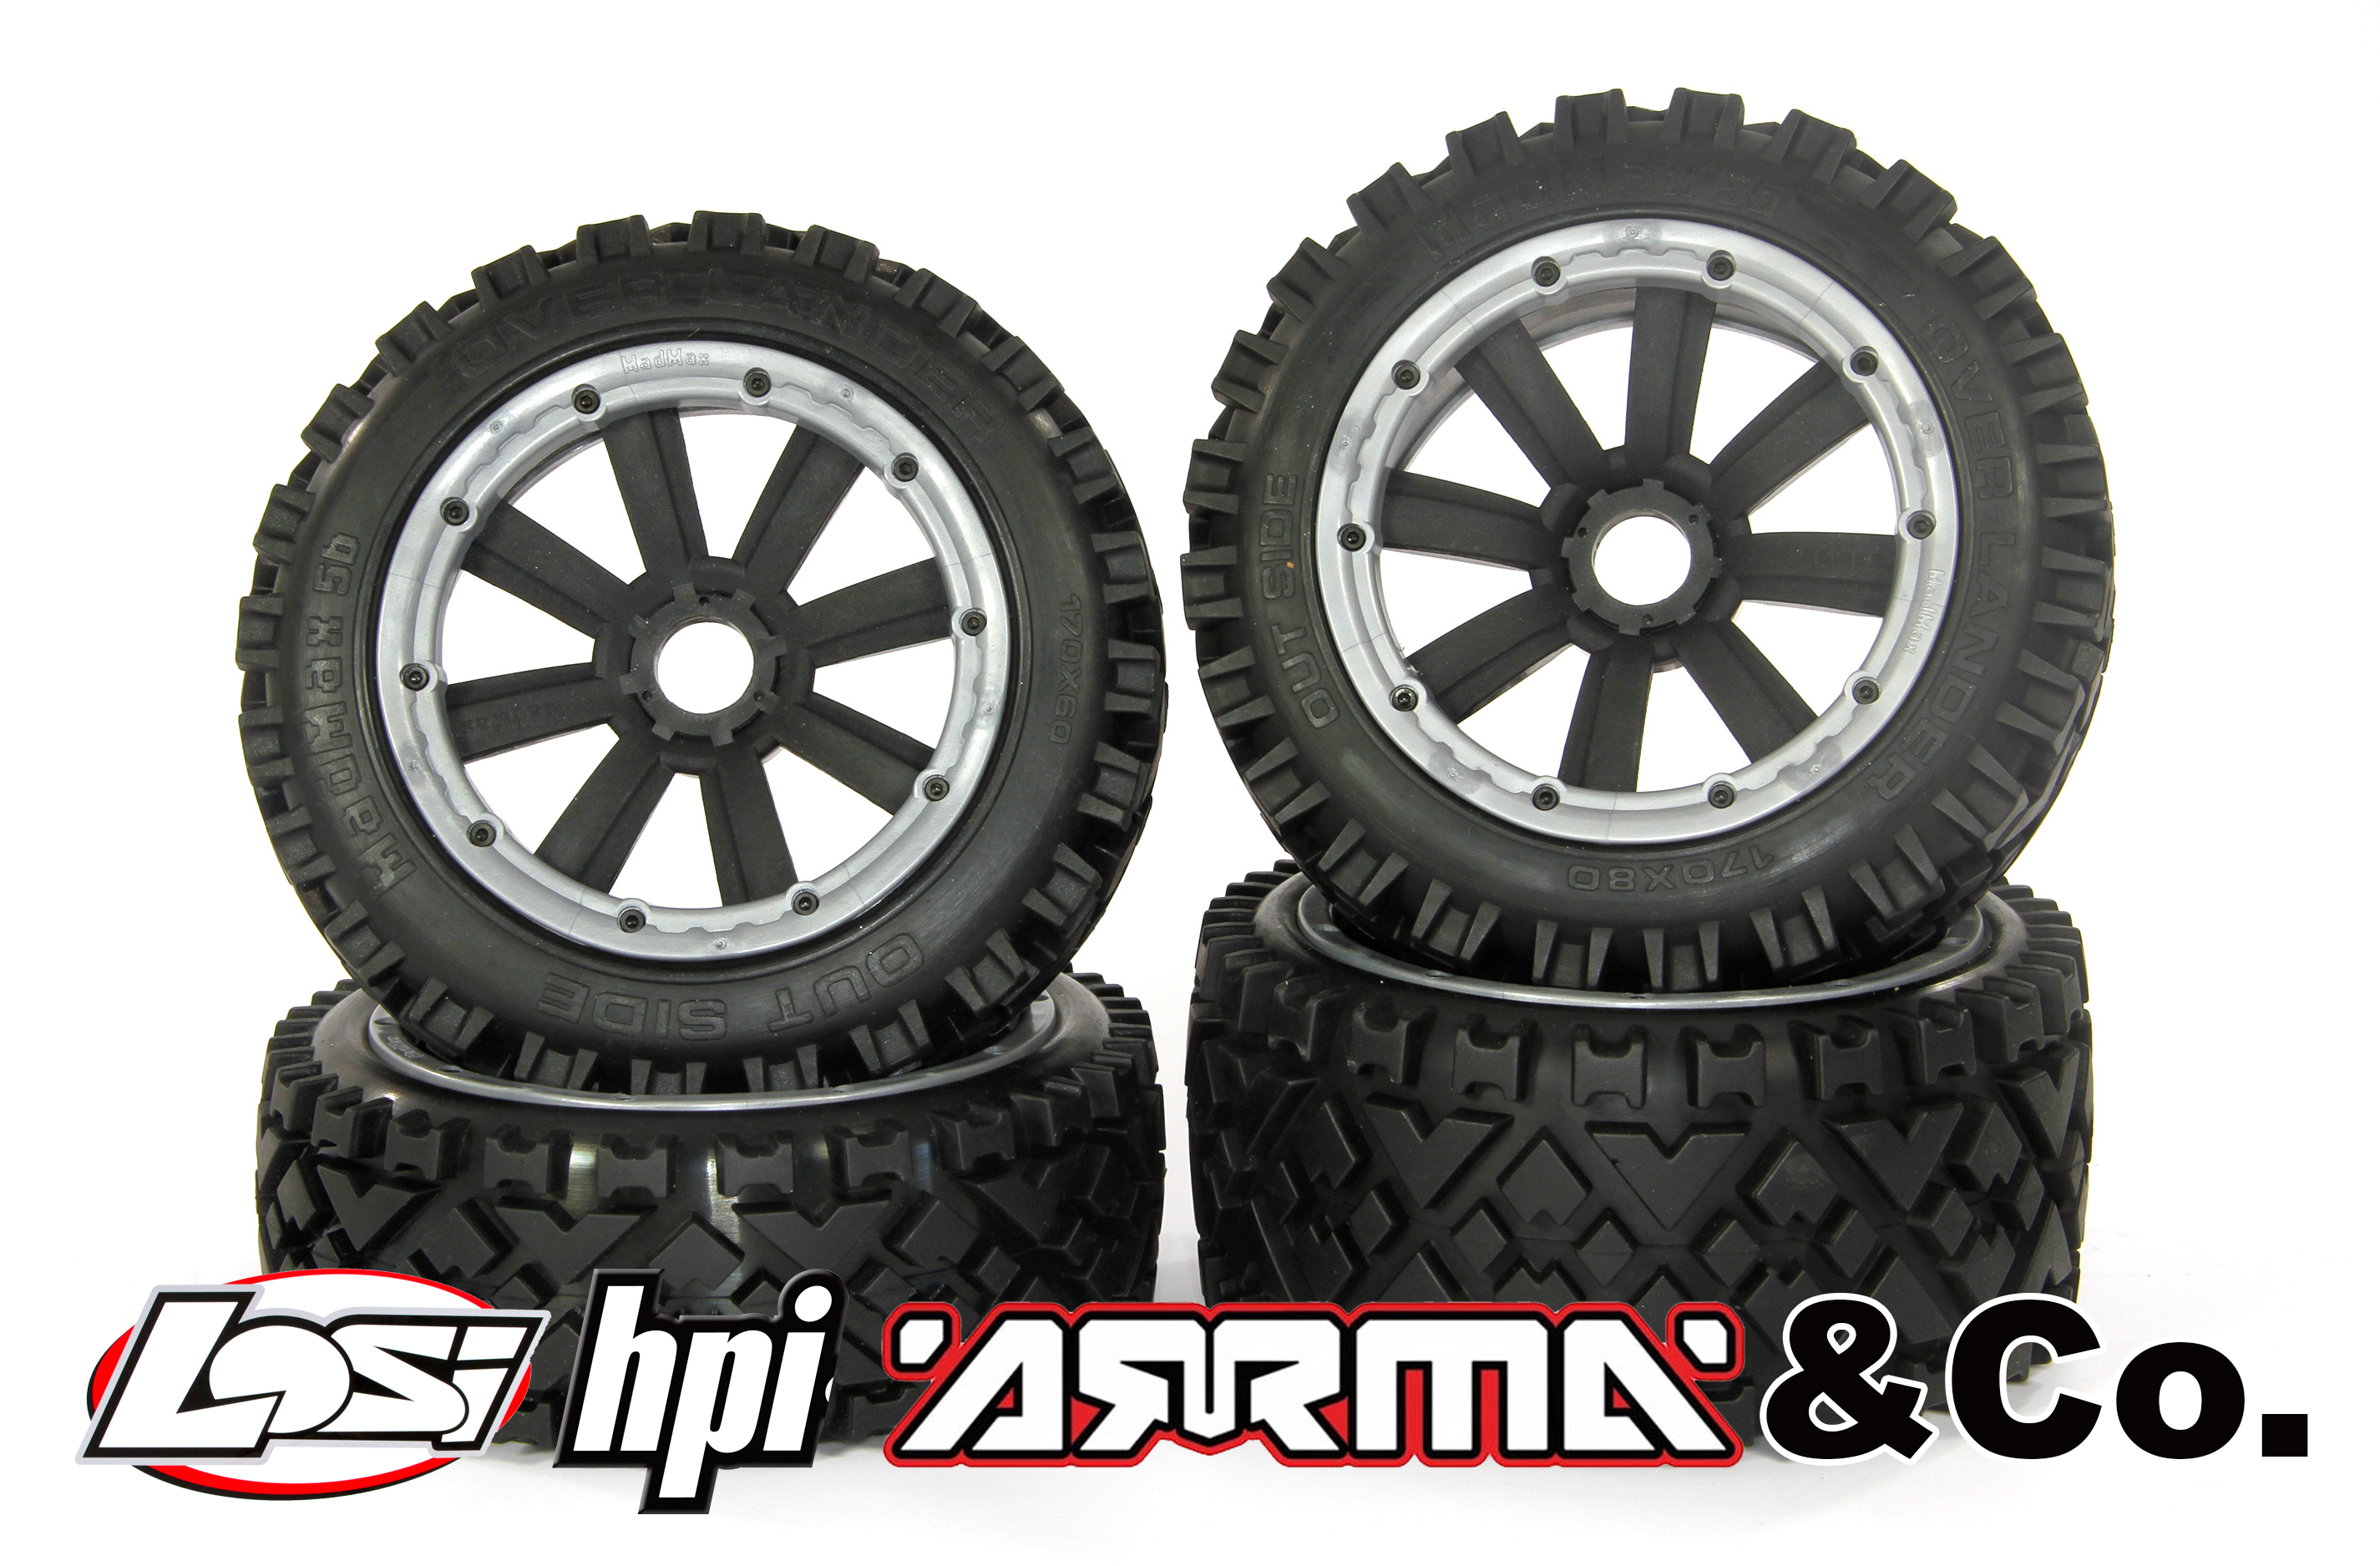 y1408/01 MadMax OVER LANDER 170x80/x60 tires for HPI + Losi (24 mm hex drive)